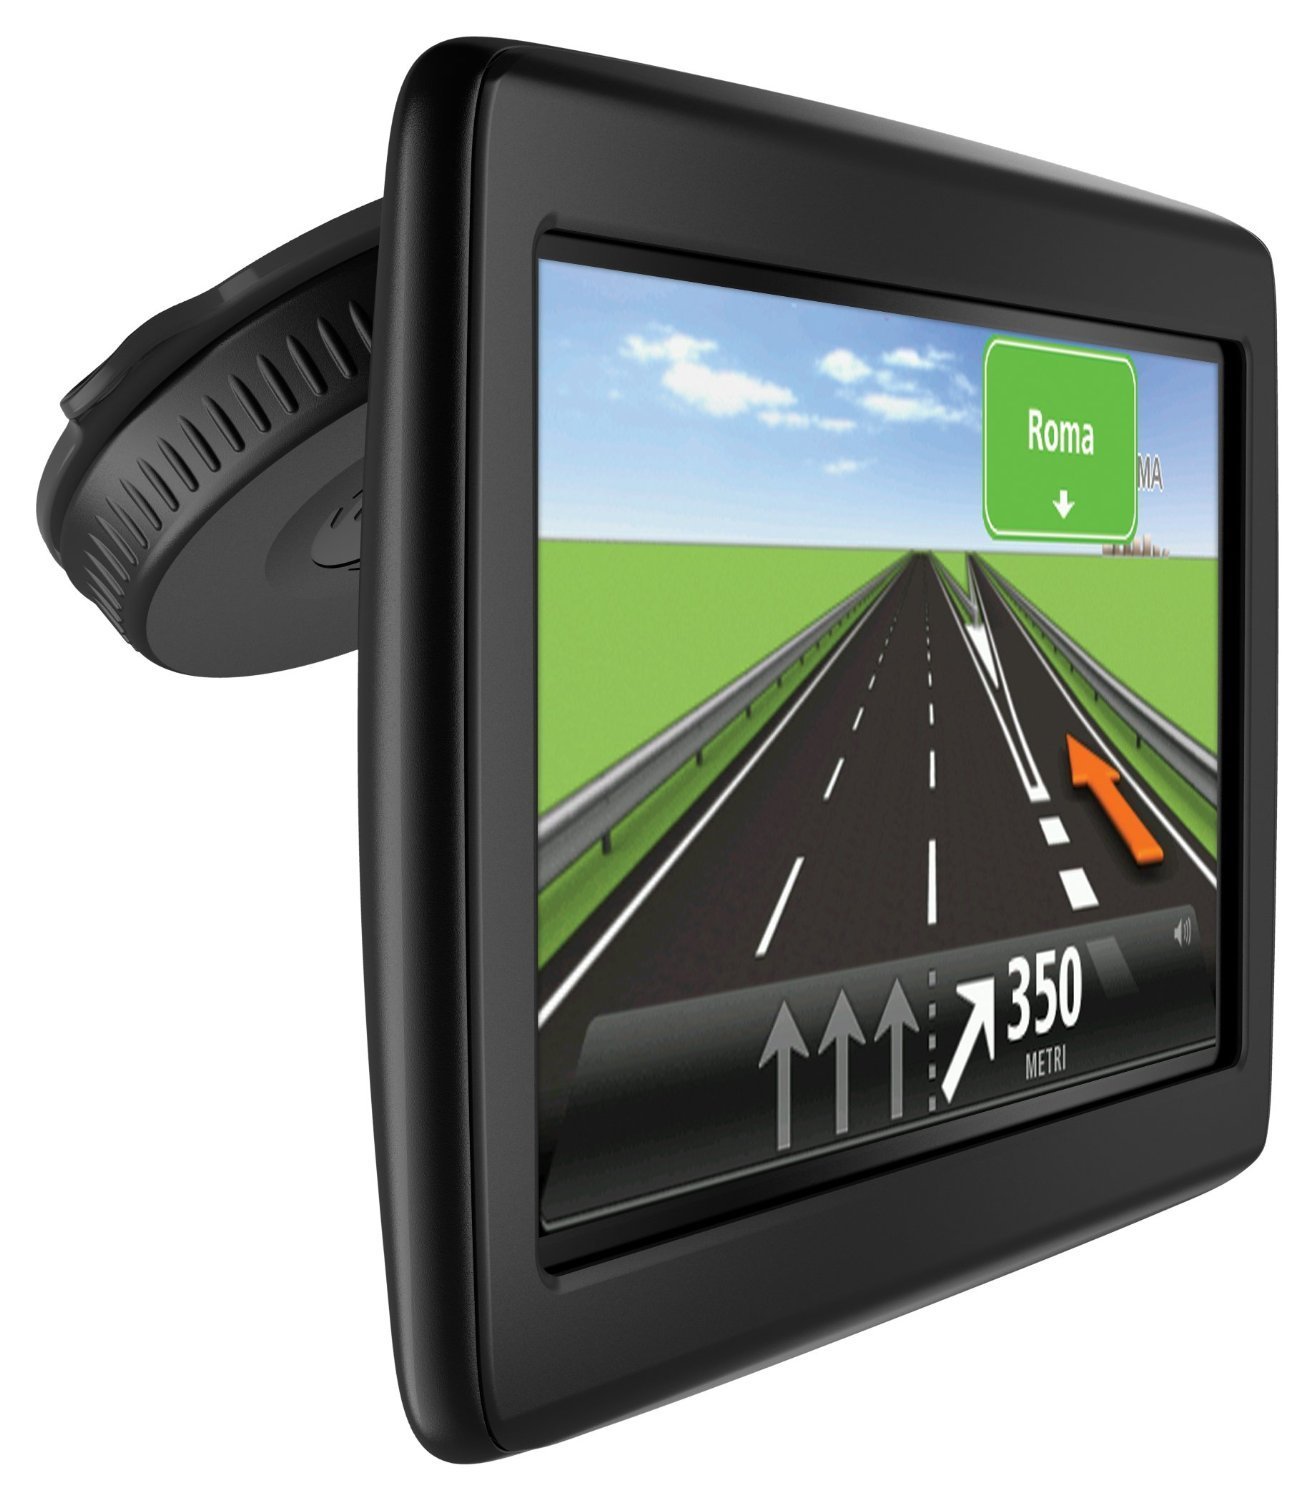 TomTom Start 25 5 inch Sat Nav with Western European Maps and Lifetime Map Updates